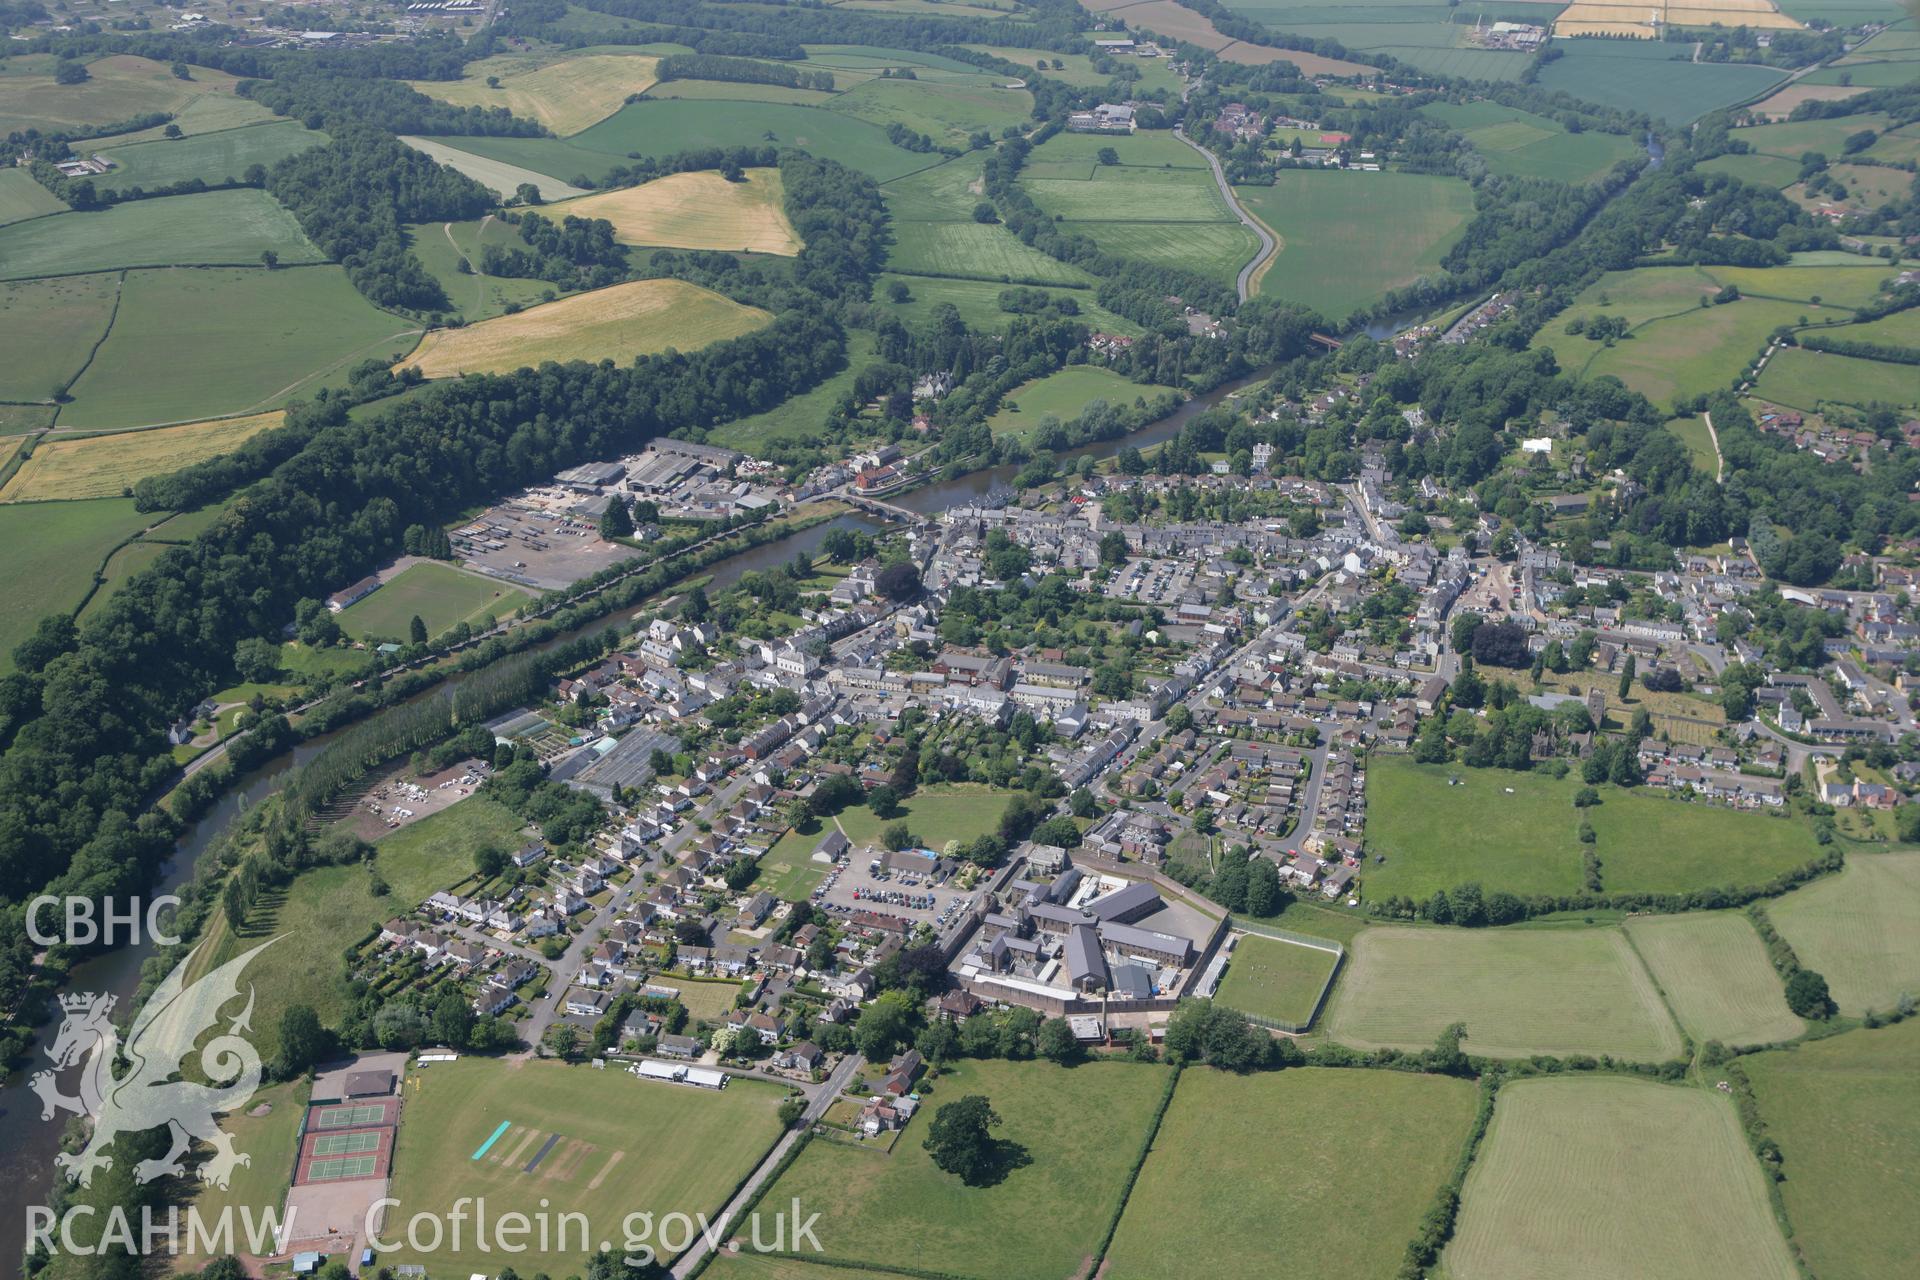 RCAHMW colour oblique photograph of Usk town, from the south. Taken by Toby Driver on 21/06/2010.